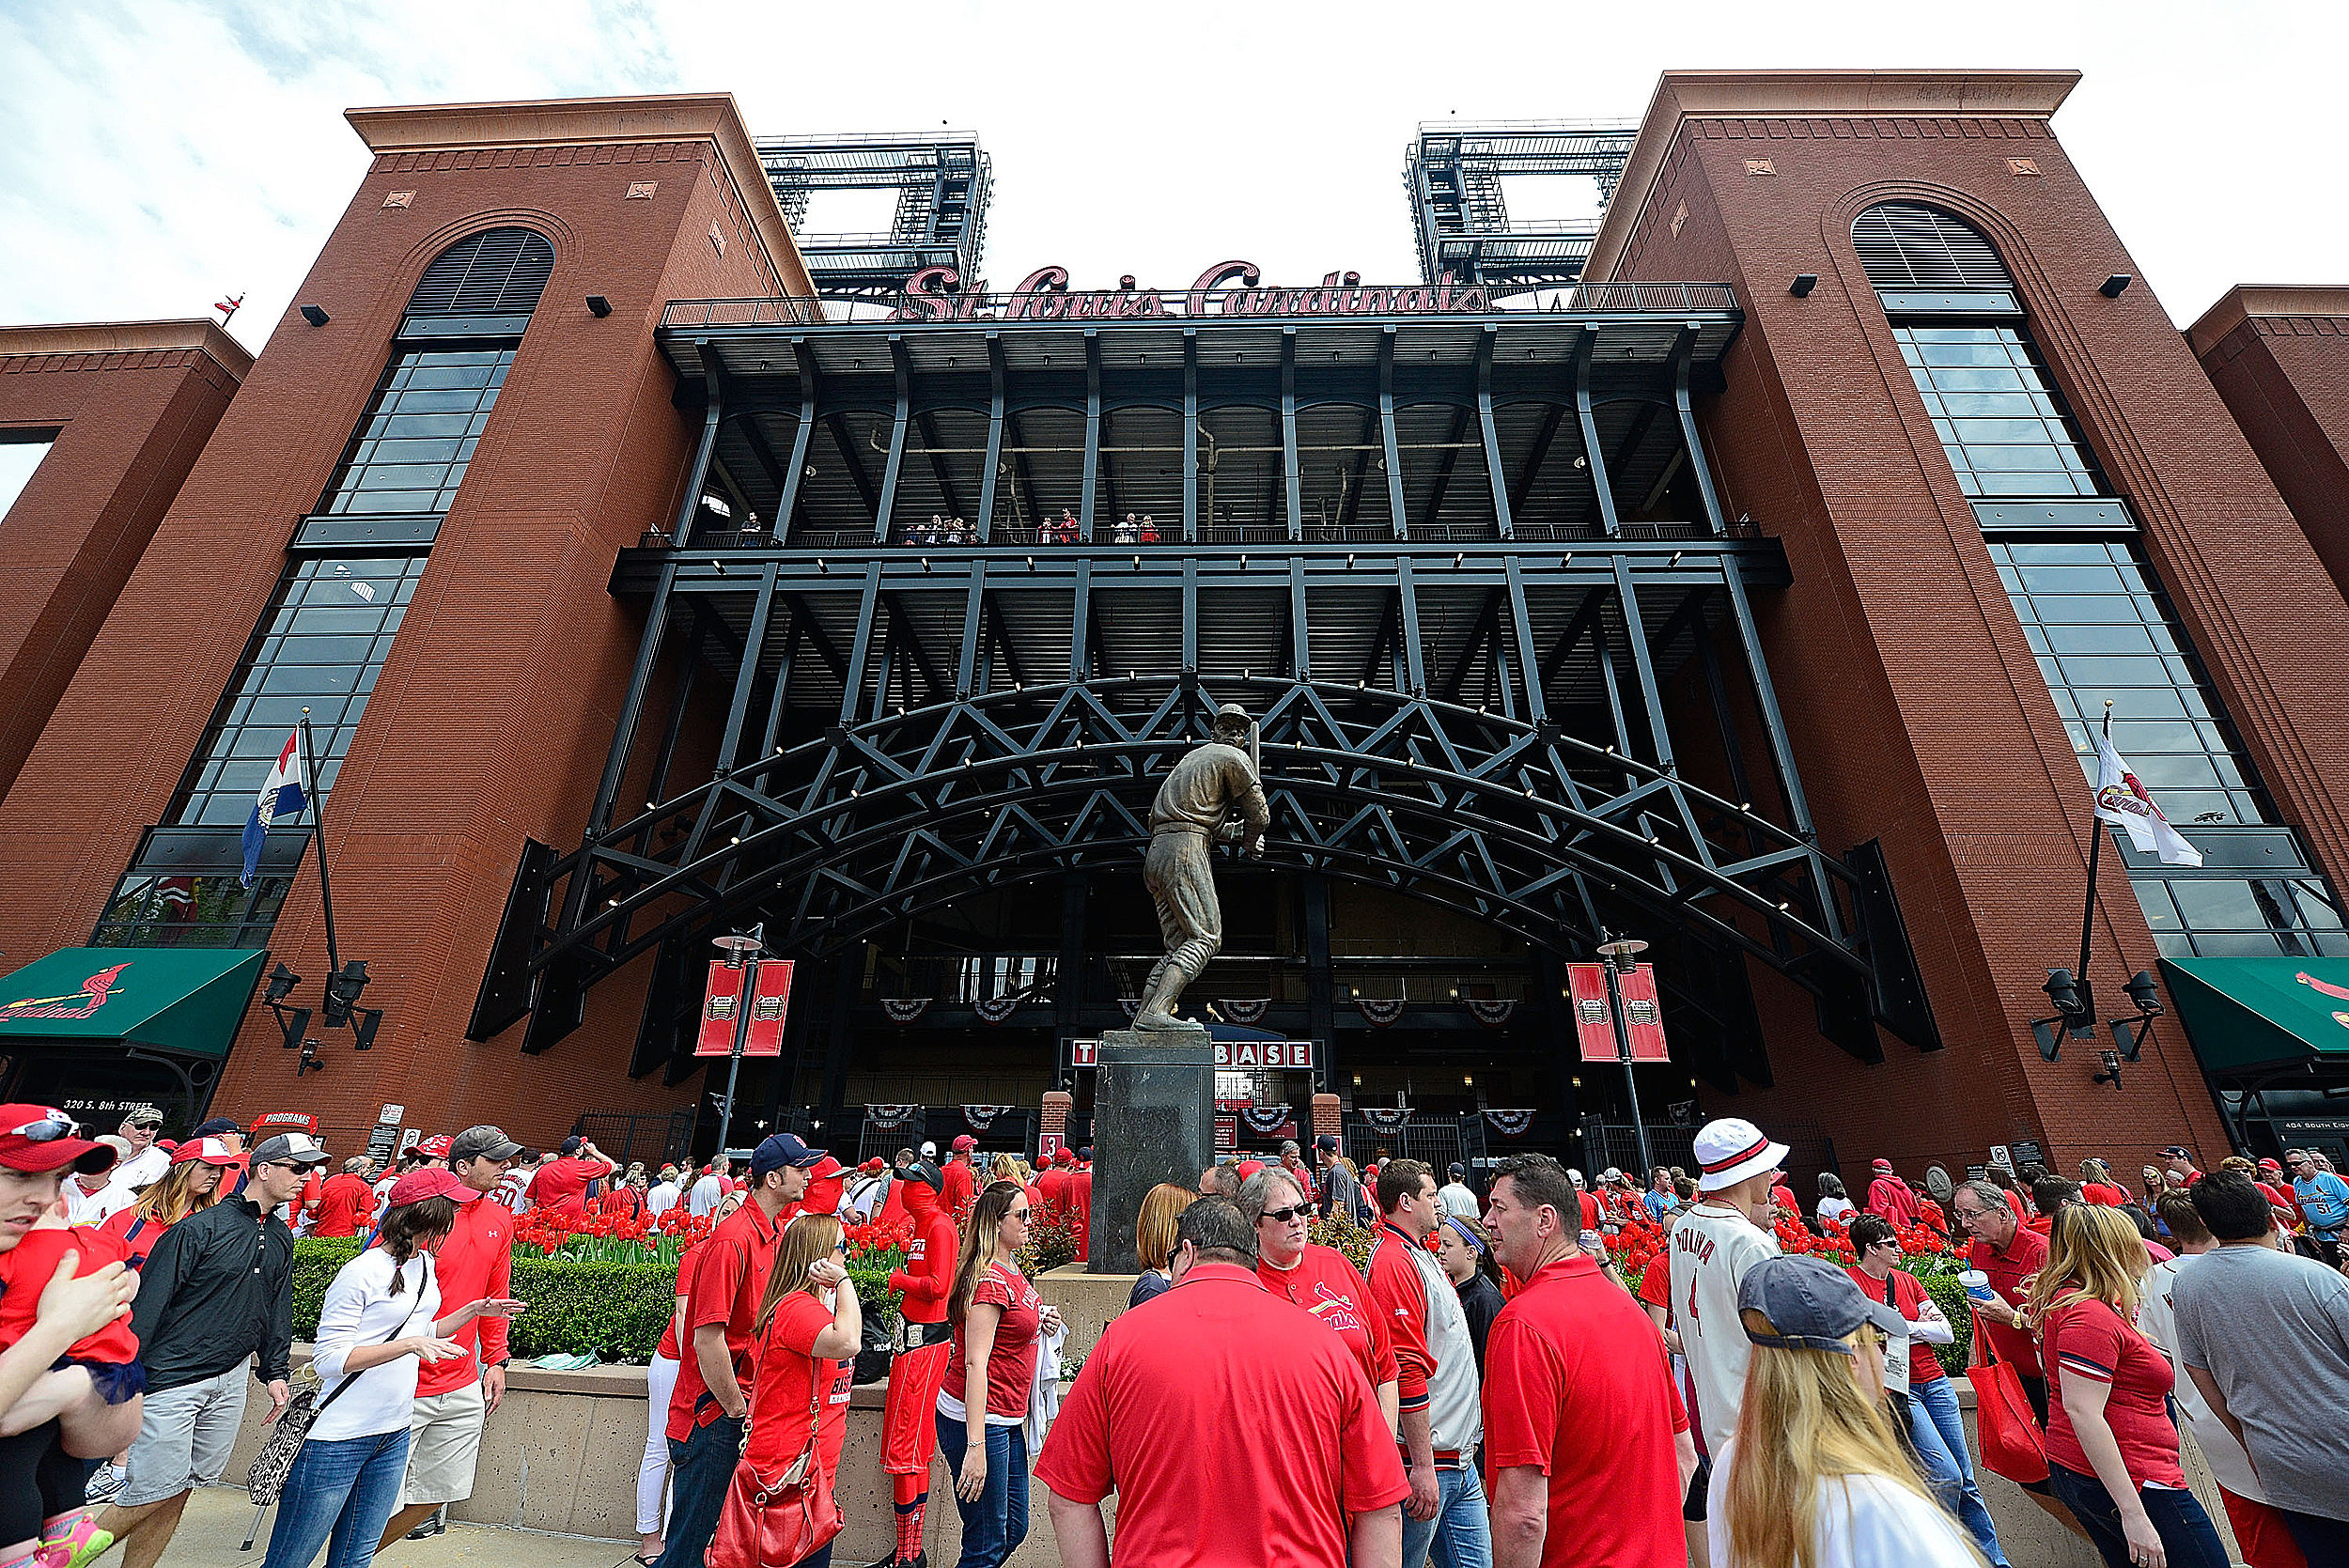 Cardinals dedicate Ted Simmons statue, retire his number